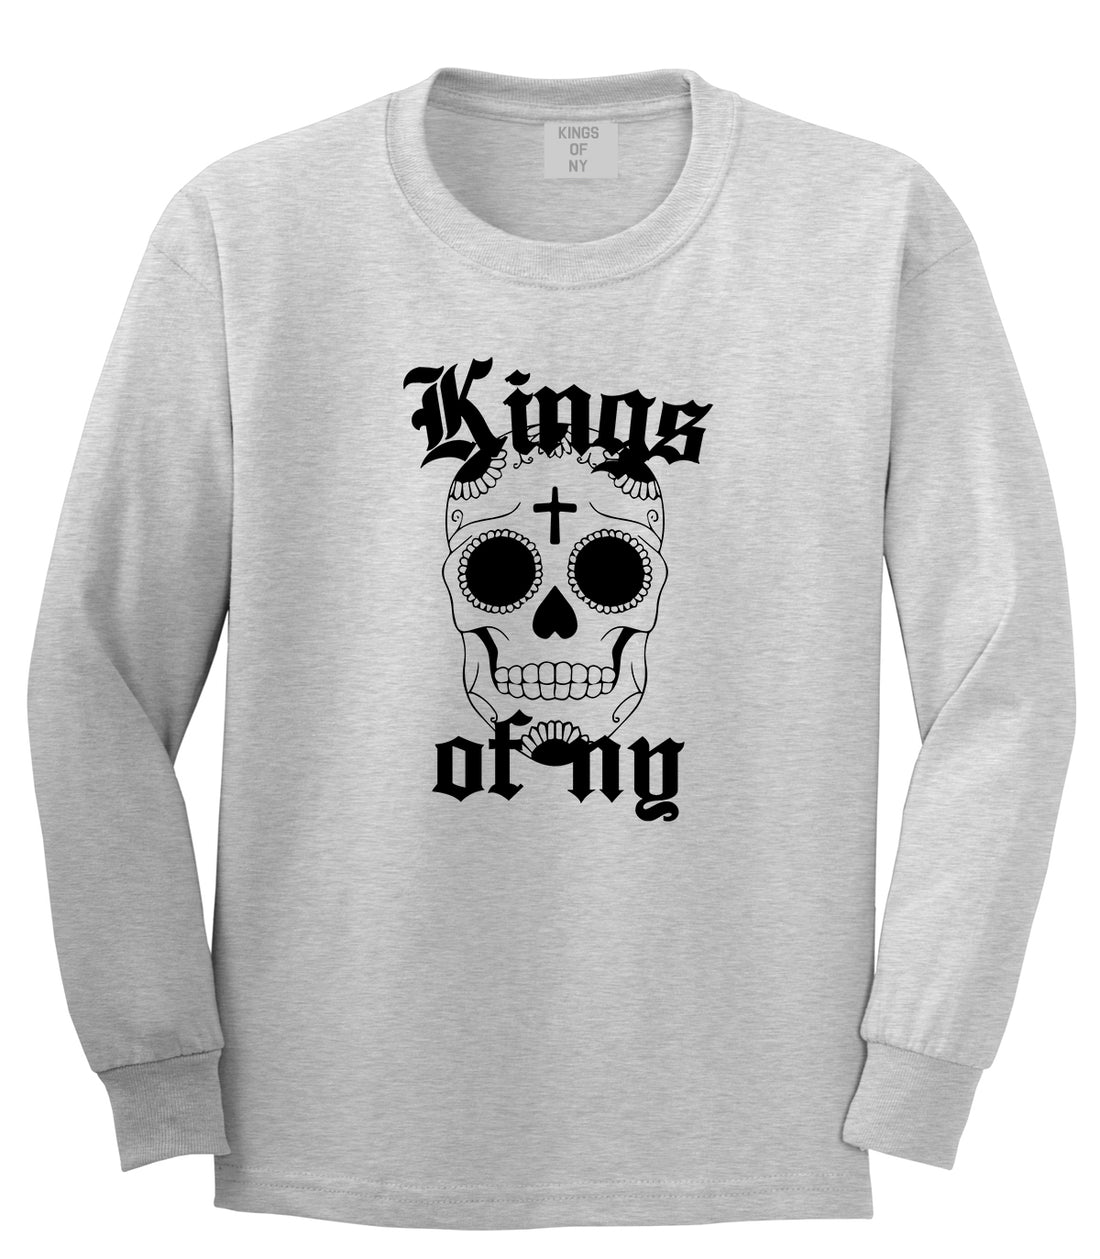 Day Of The Dead KONY Mens Long Sleeve T-Shirt Grey by Kings Of NY